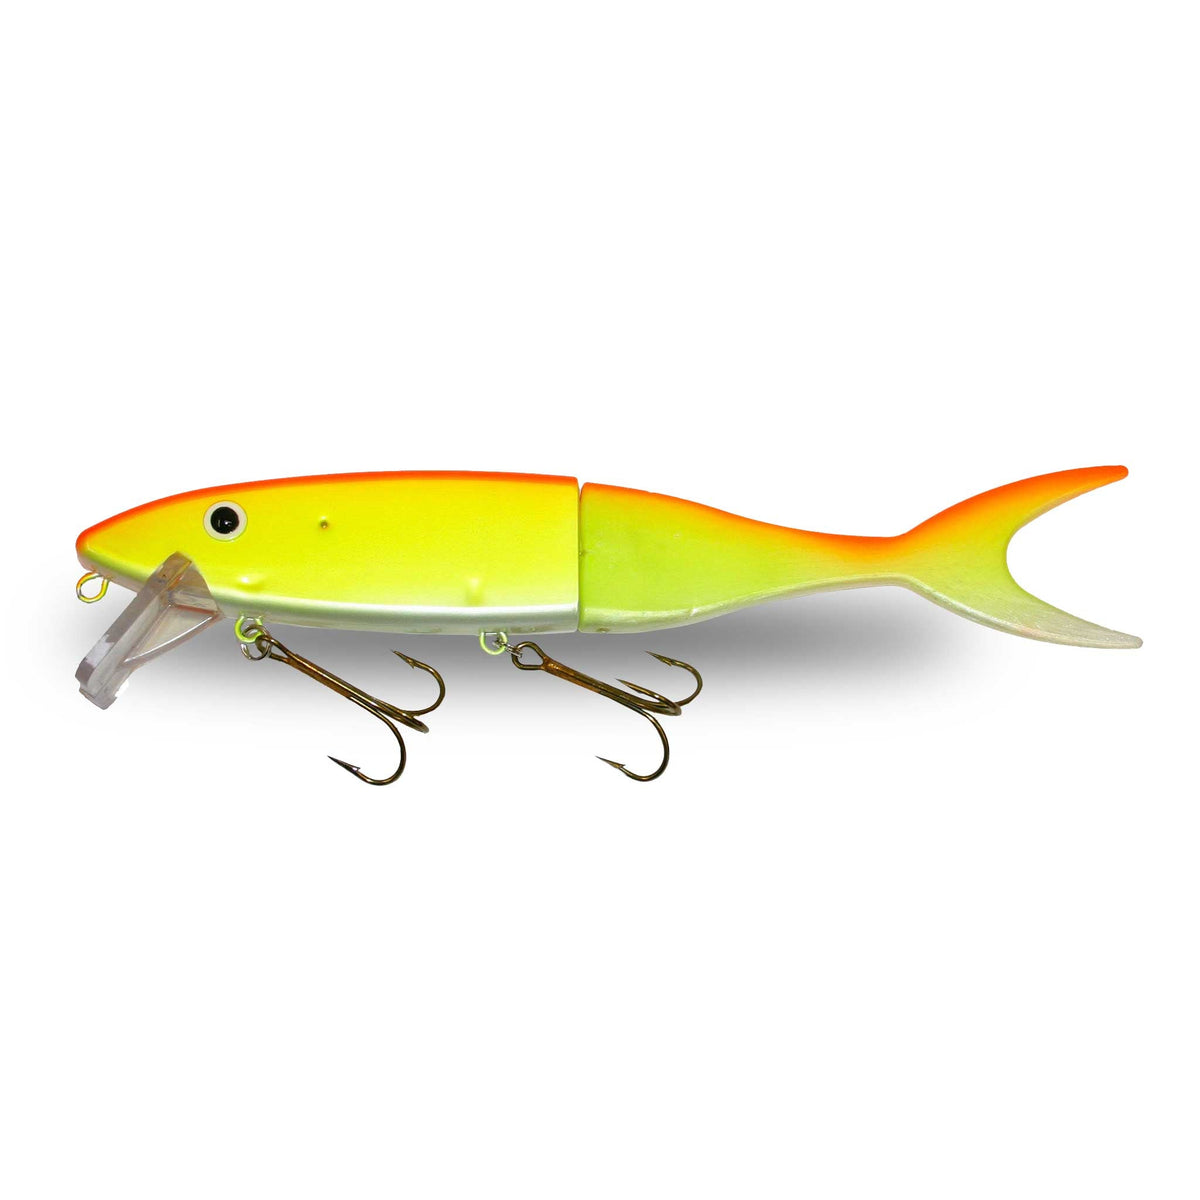 Musky Lures - Handcrafted cedar wood lures for northern pike, musky, walleye  and bass. Big Fork Lures Official Site